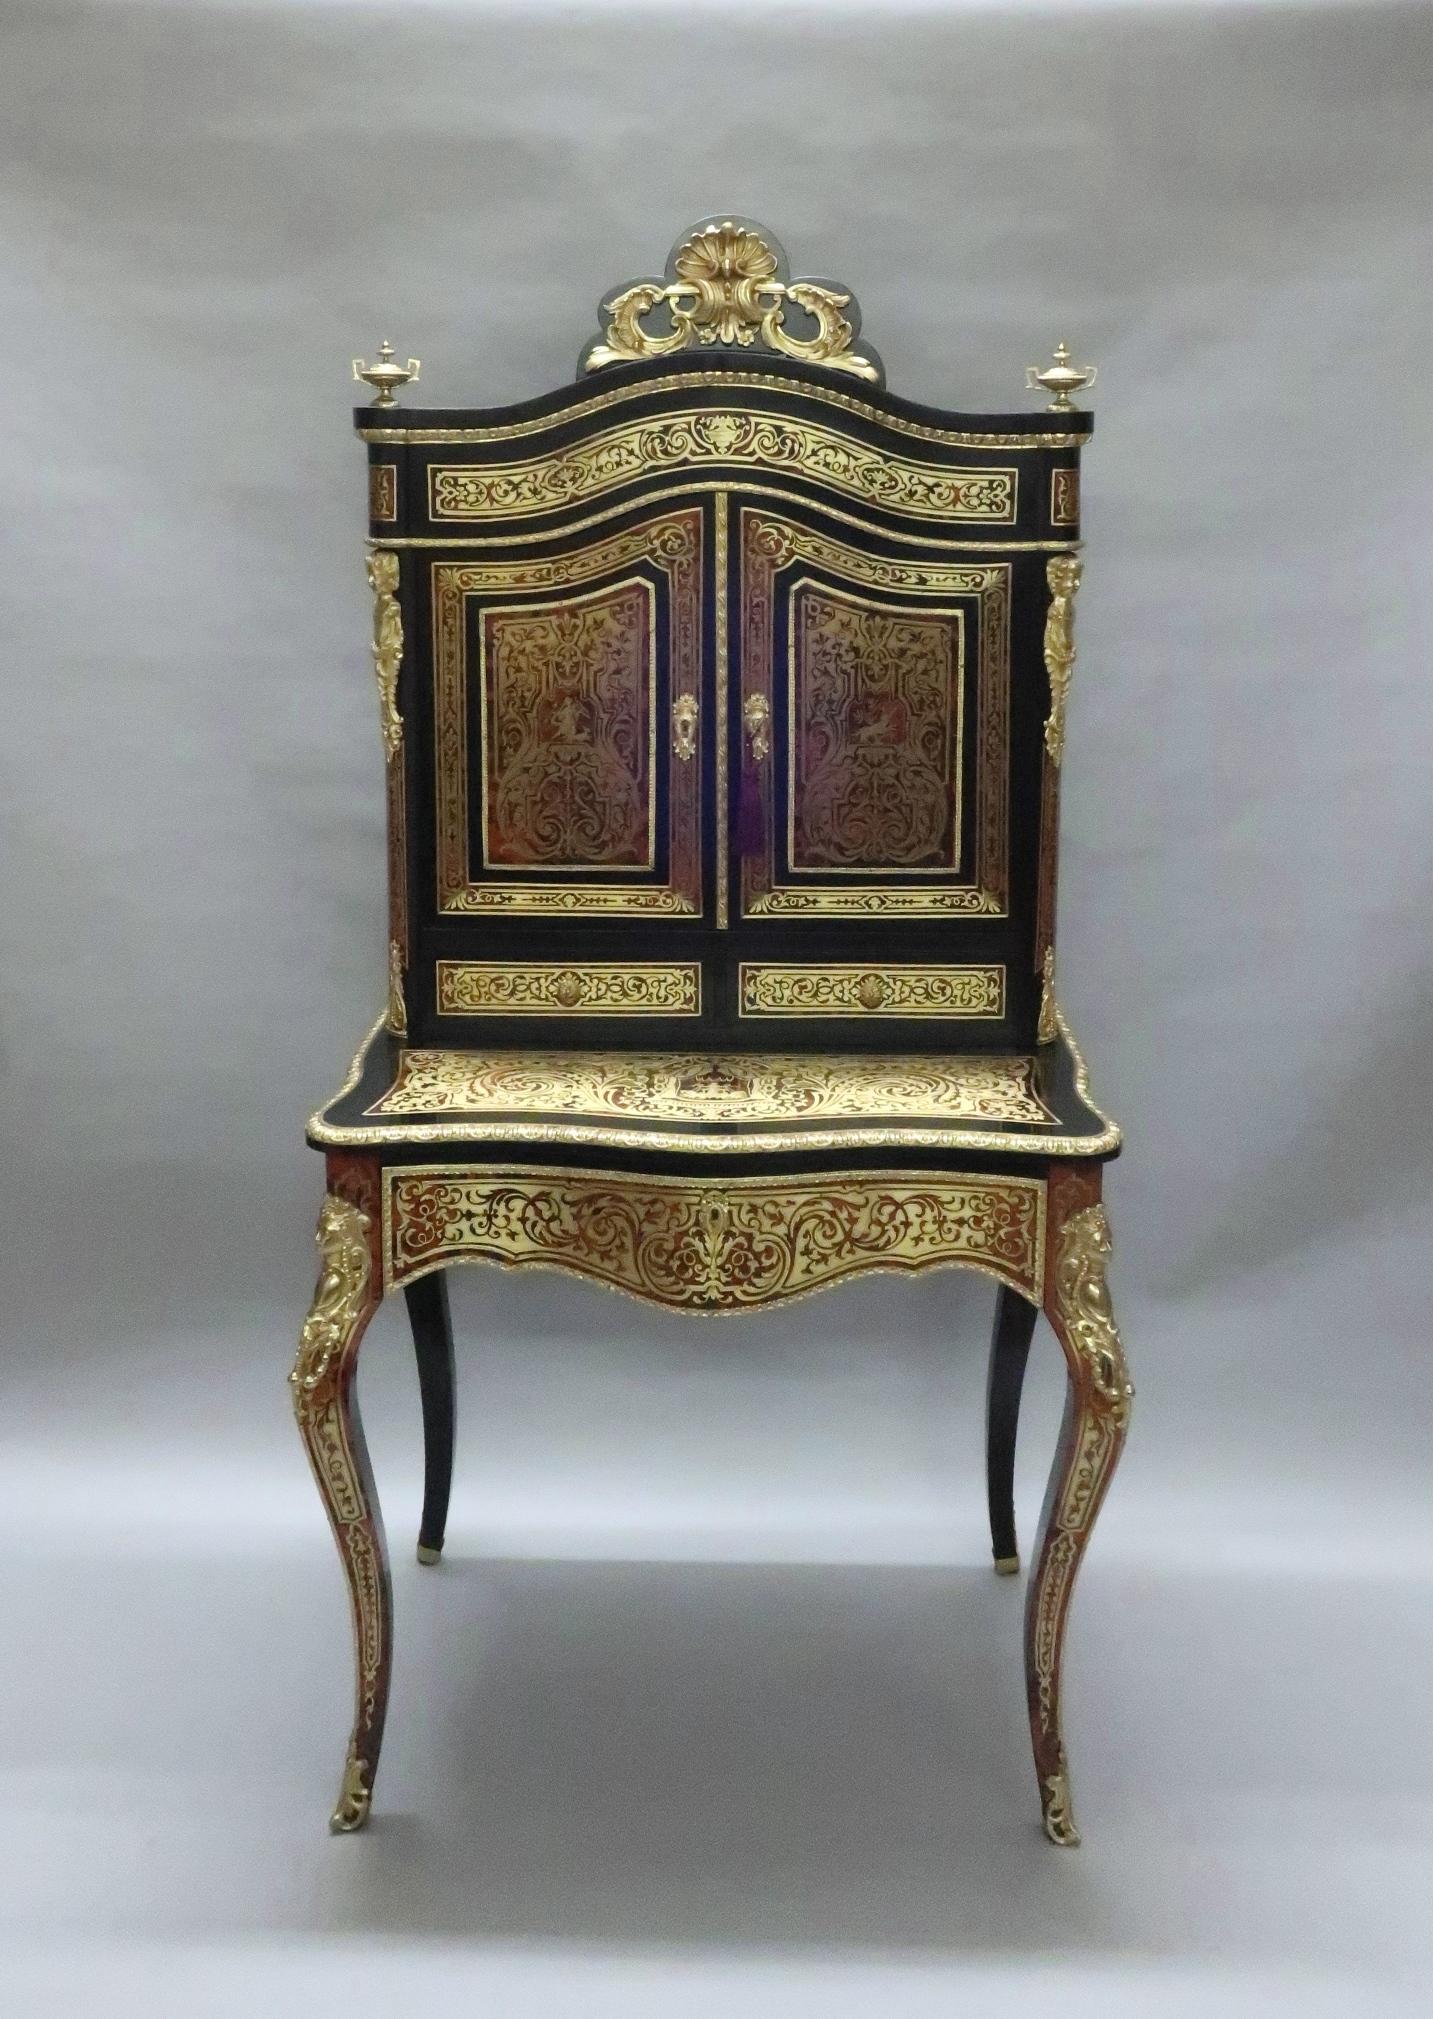 An exceptional French serpentine shaped boulle red tortoiseshell and engraved brass Bonheur du jour. At some time in its life it has been adapted into a very fine looking dressing table. The base on the cabinet has a drawer to the front which opens